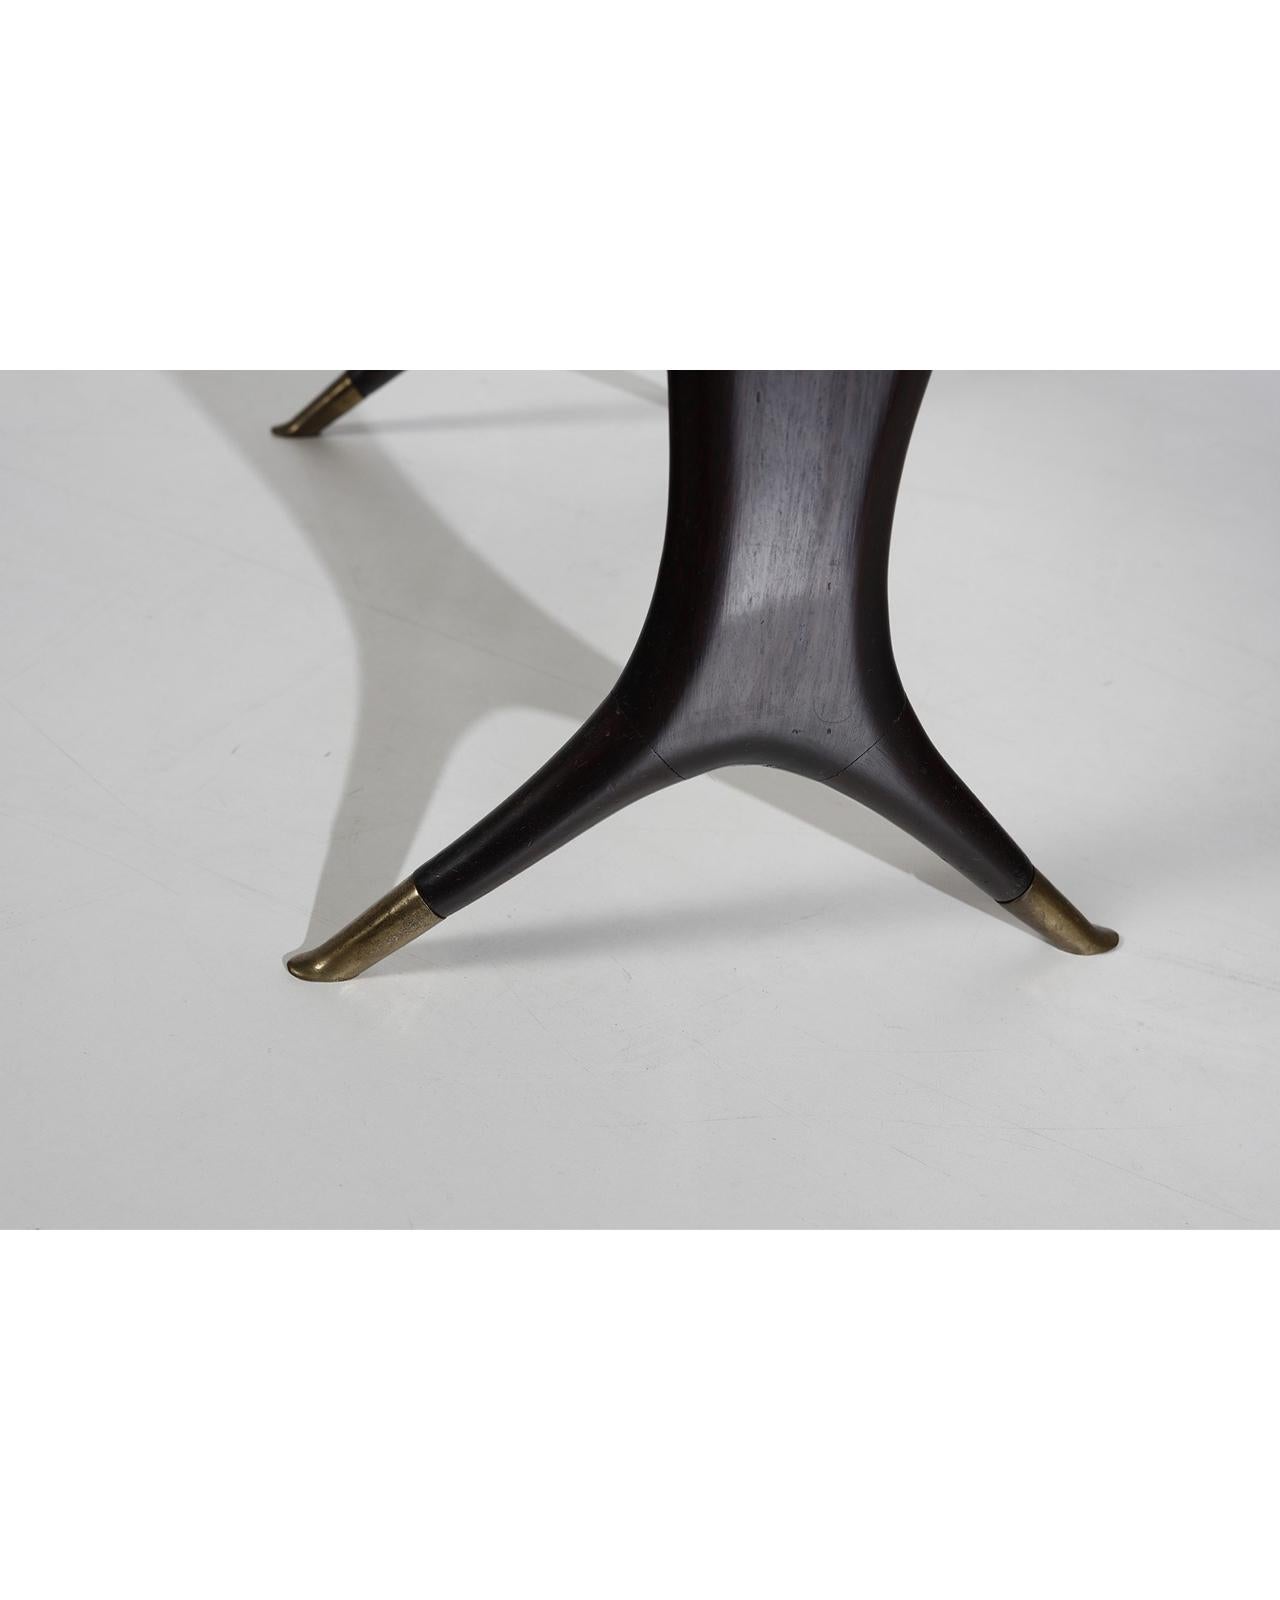 Coffee Table in Wood by Guglielmo Ulrich, c.1960s

Wood, marble, brass

Additional information: 
Dimensions: H 49 x W 48 cm


